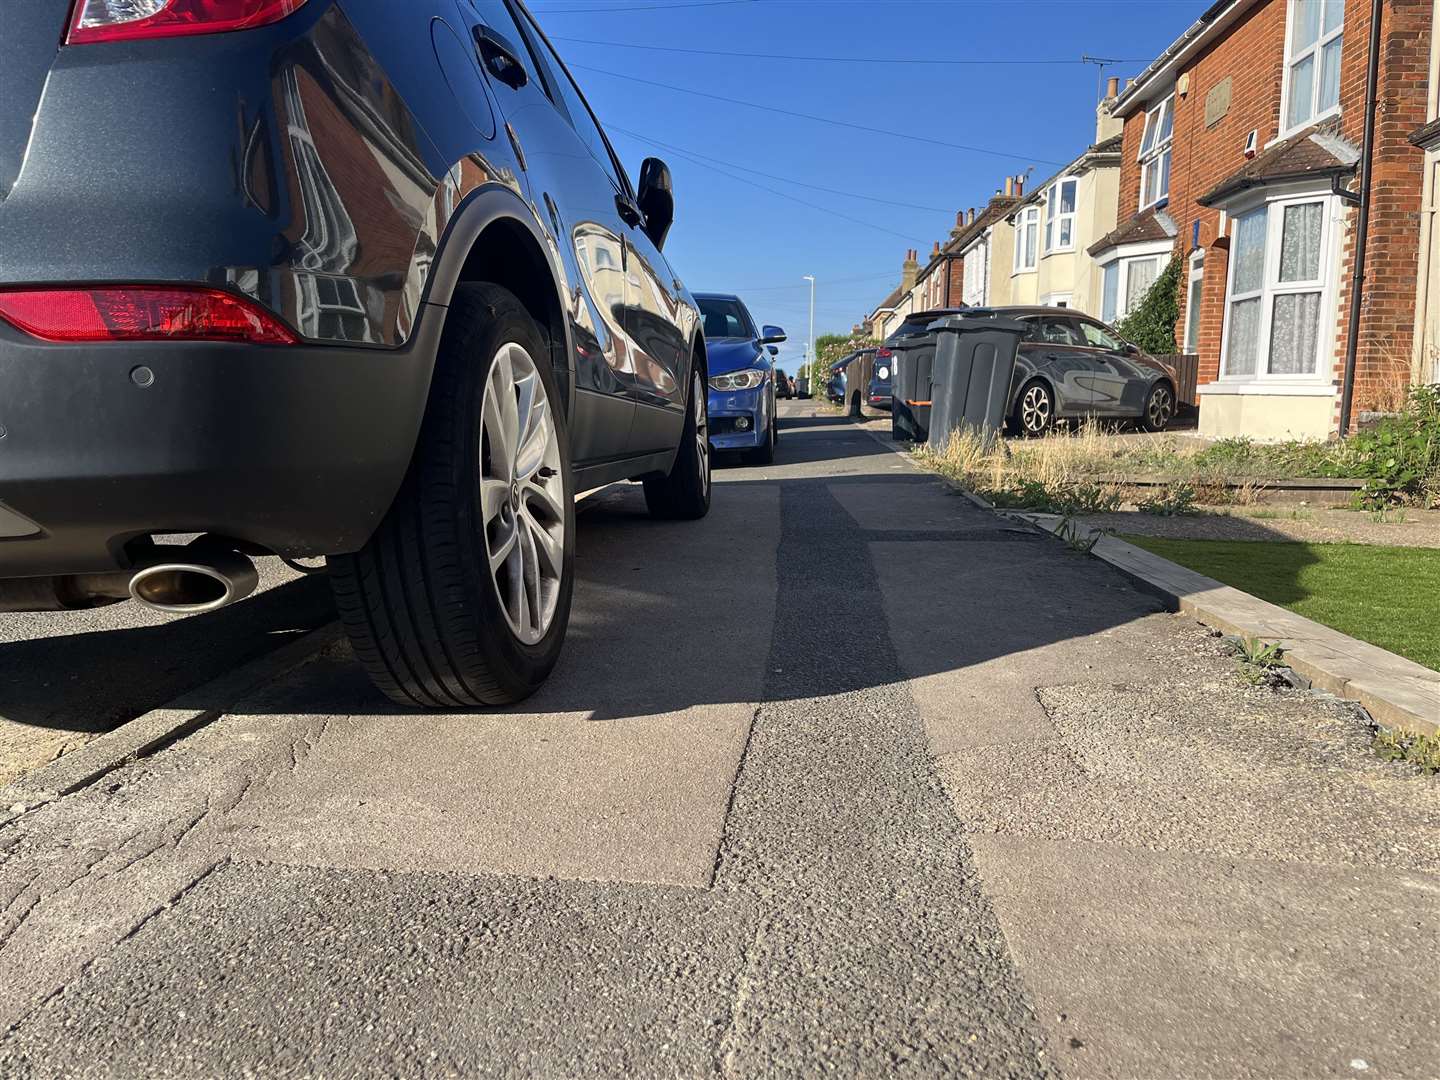 Mr New said motorists parking on the pavement like here in Albemarle Road, Willesborough, is often a "saving grace" so fire engines can get down narrow roads